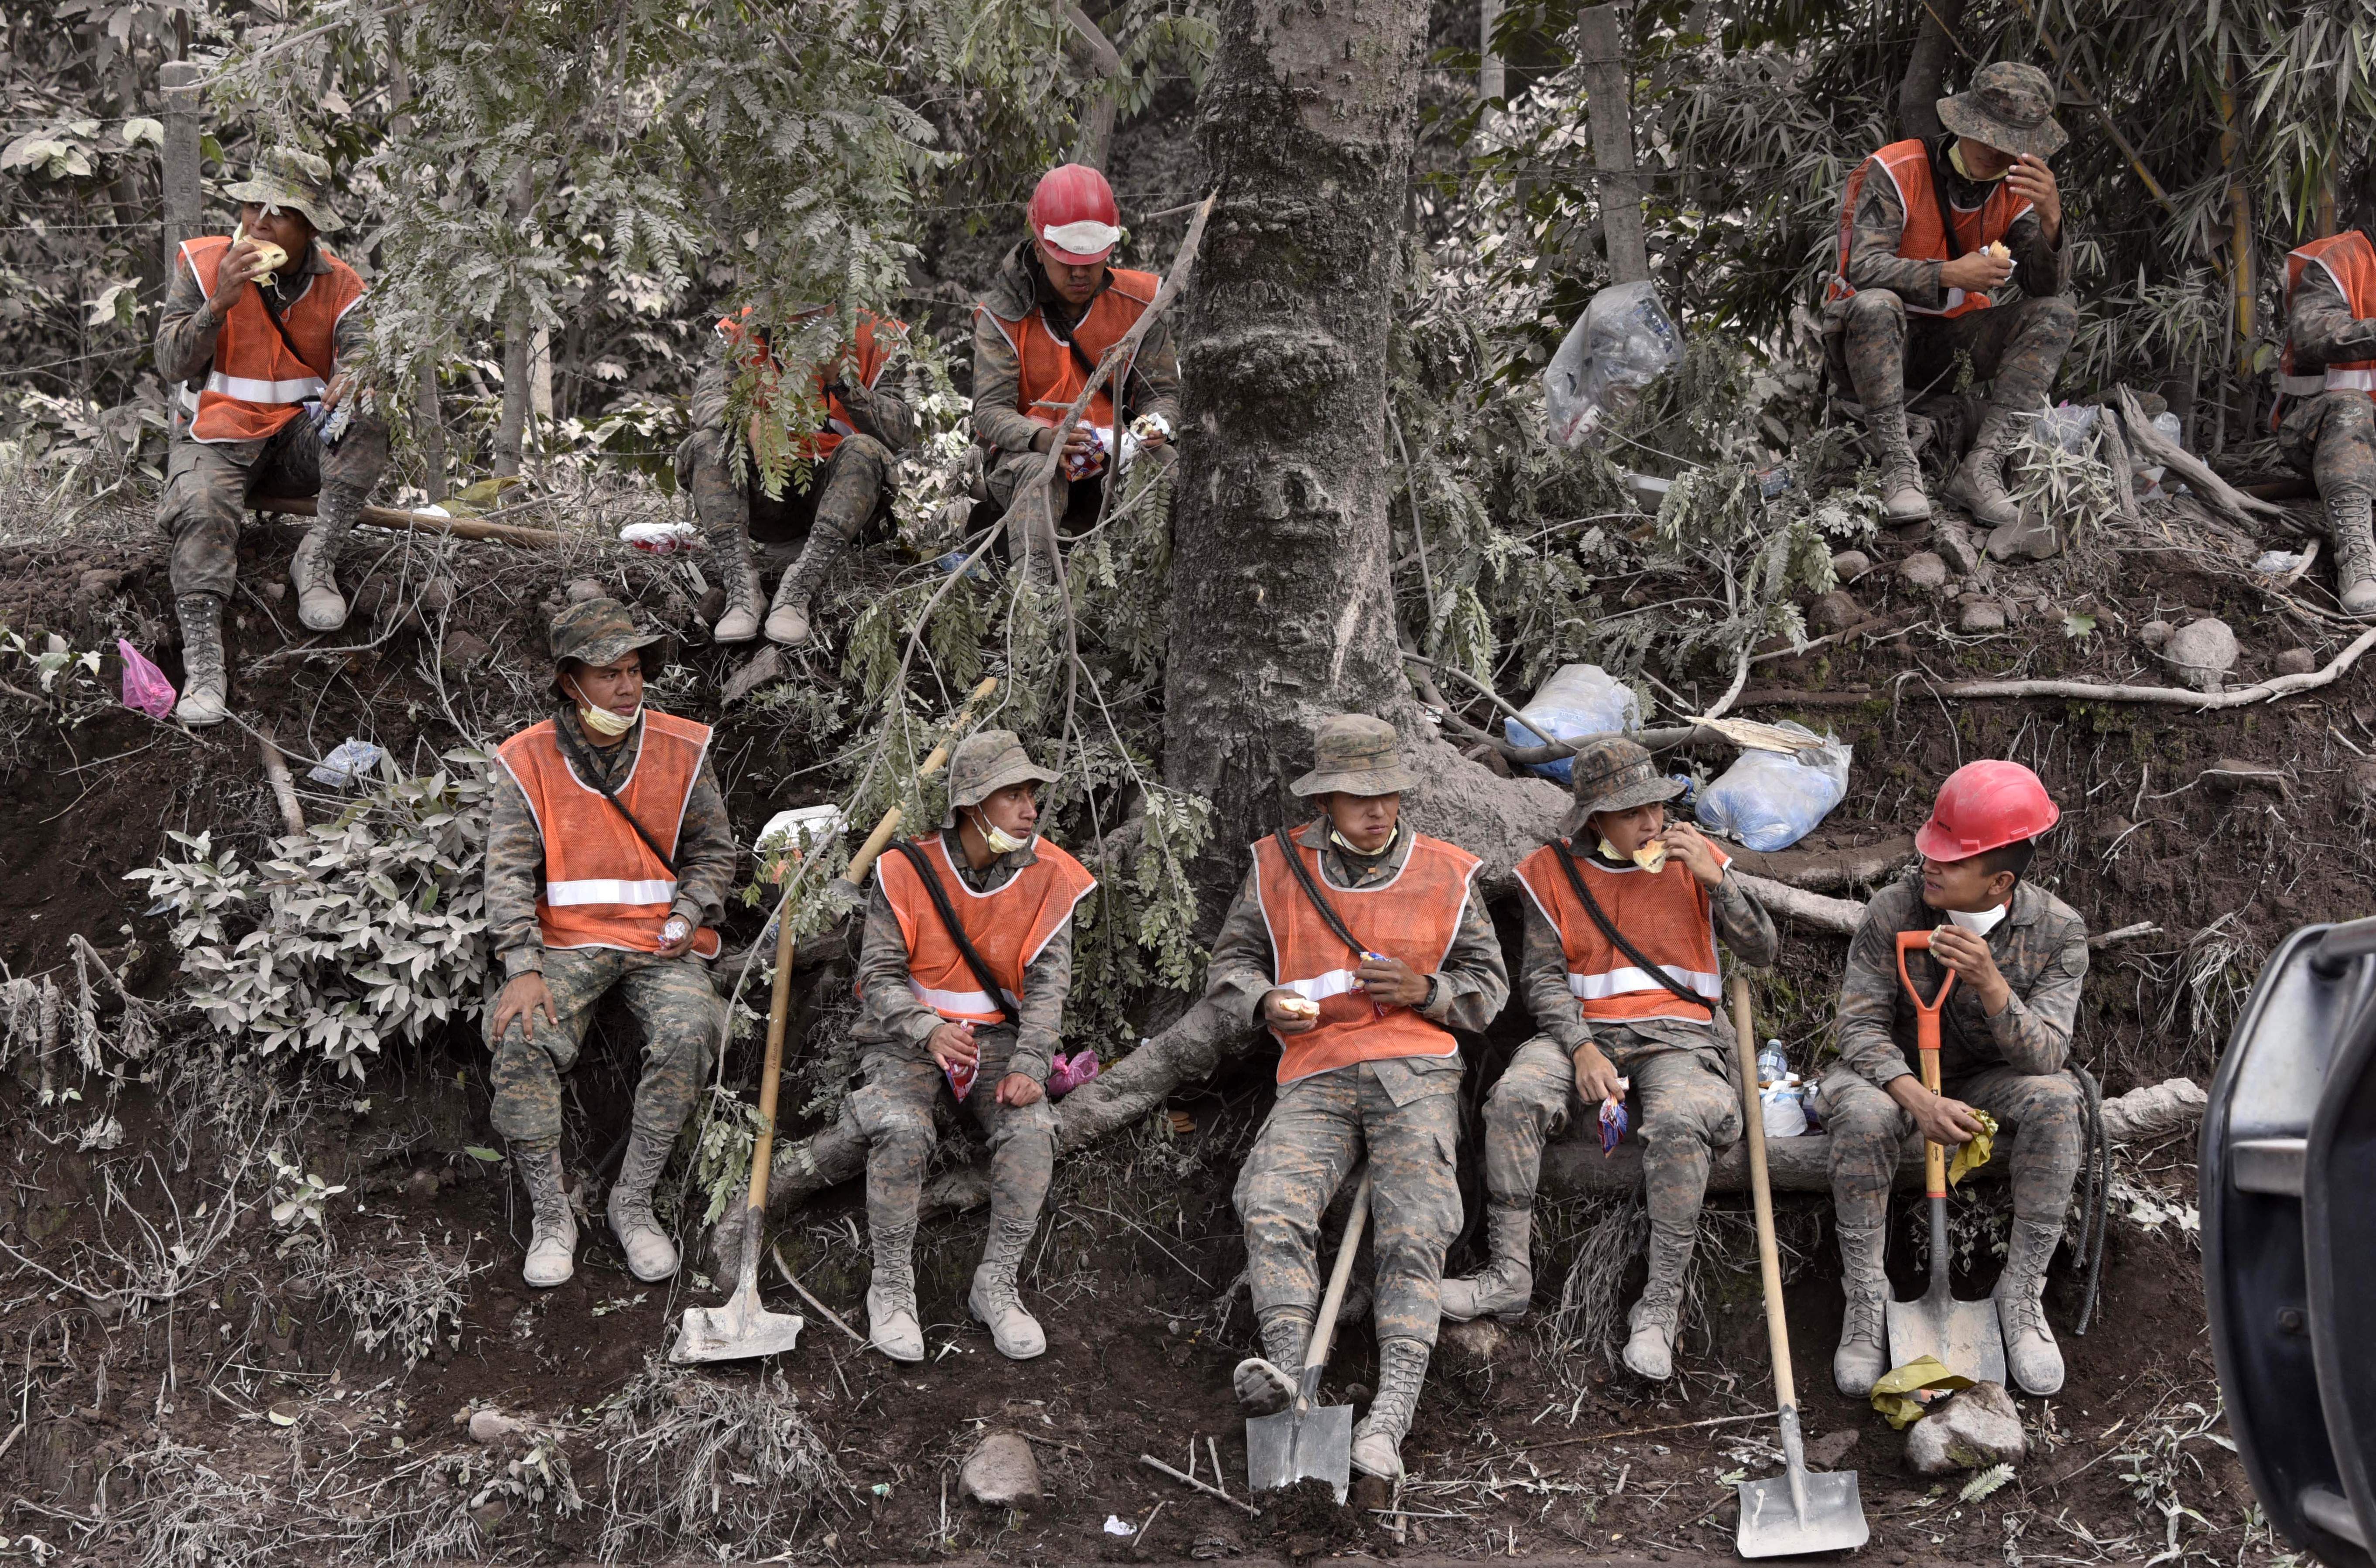 Soldiers take a break during the search for victims